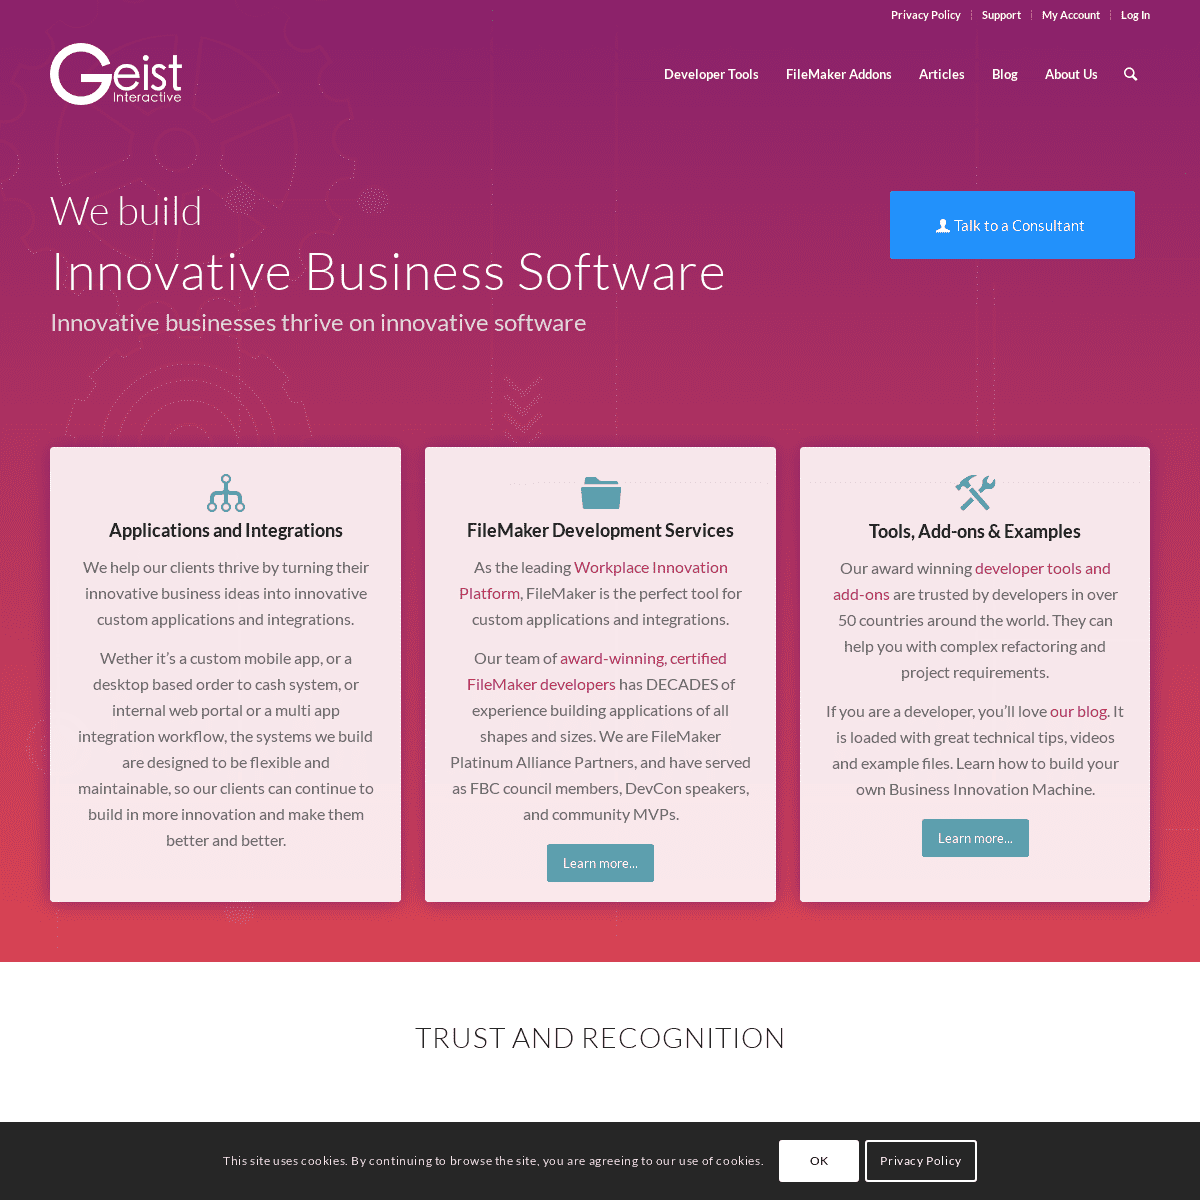 A complete backup of geistinteractive.com